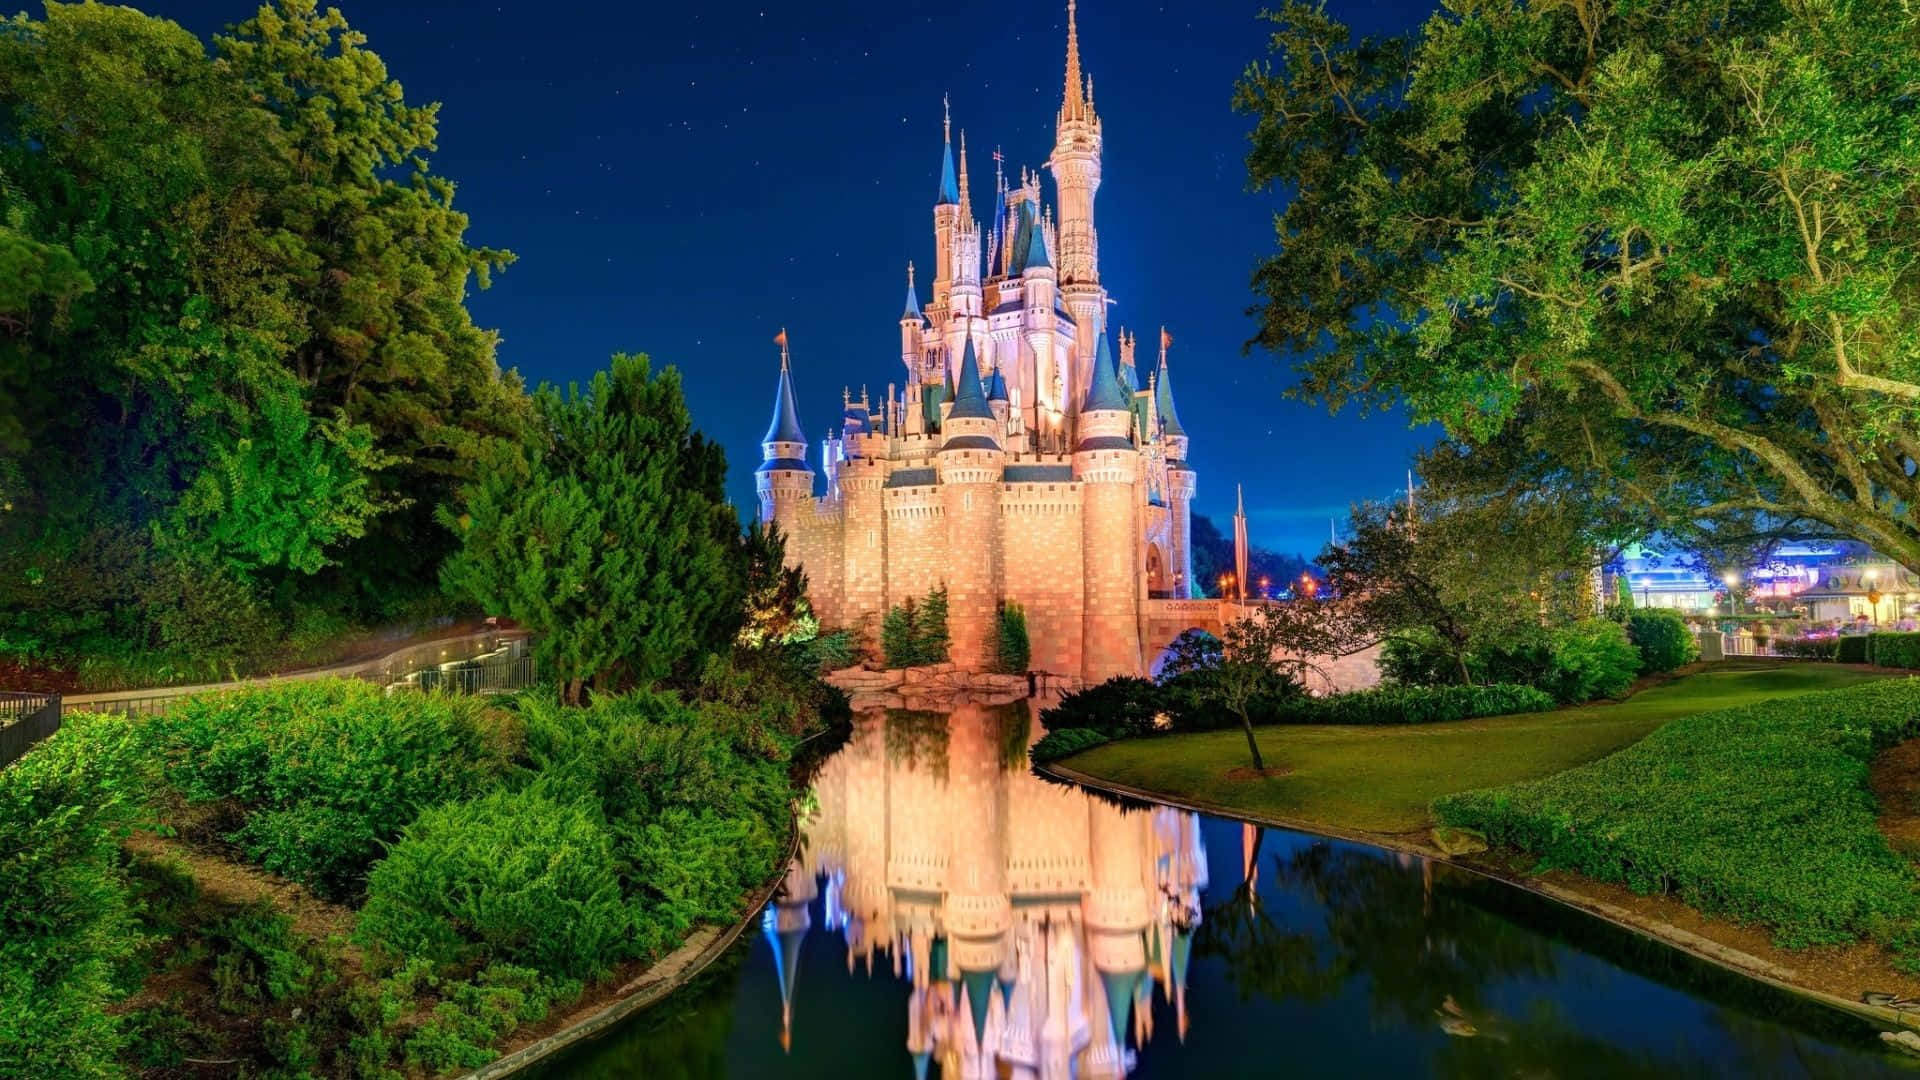 Experience Wonder at the Most Magical Place on Earth - Walt Disney World